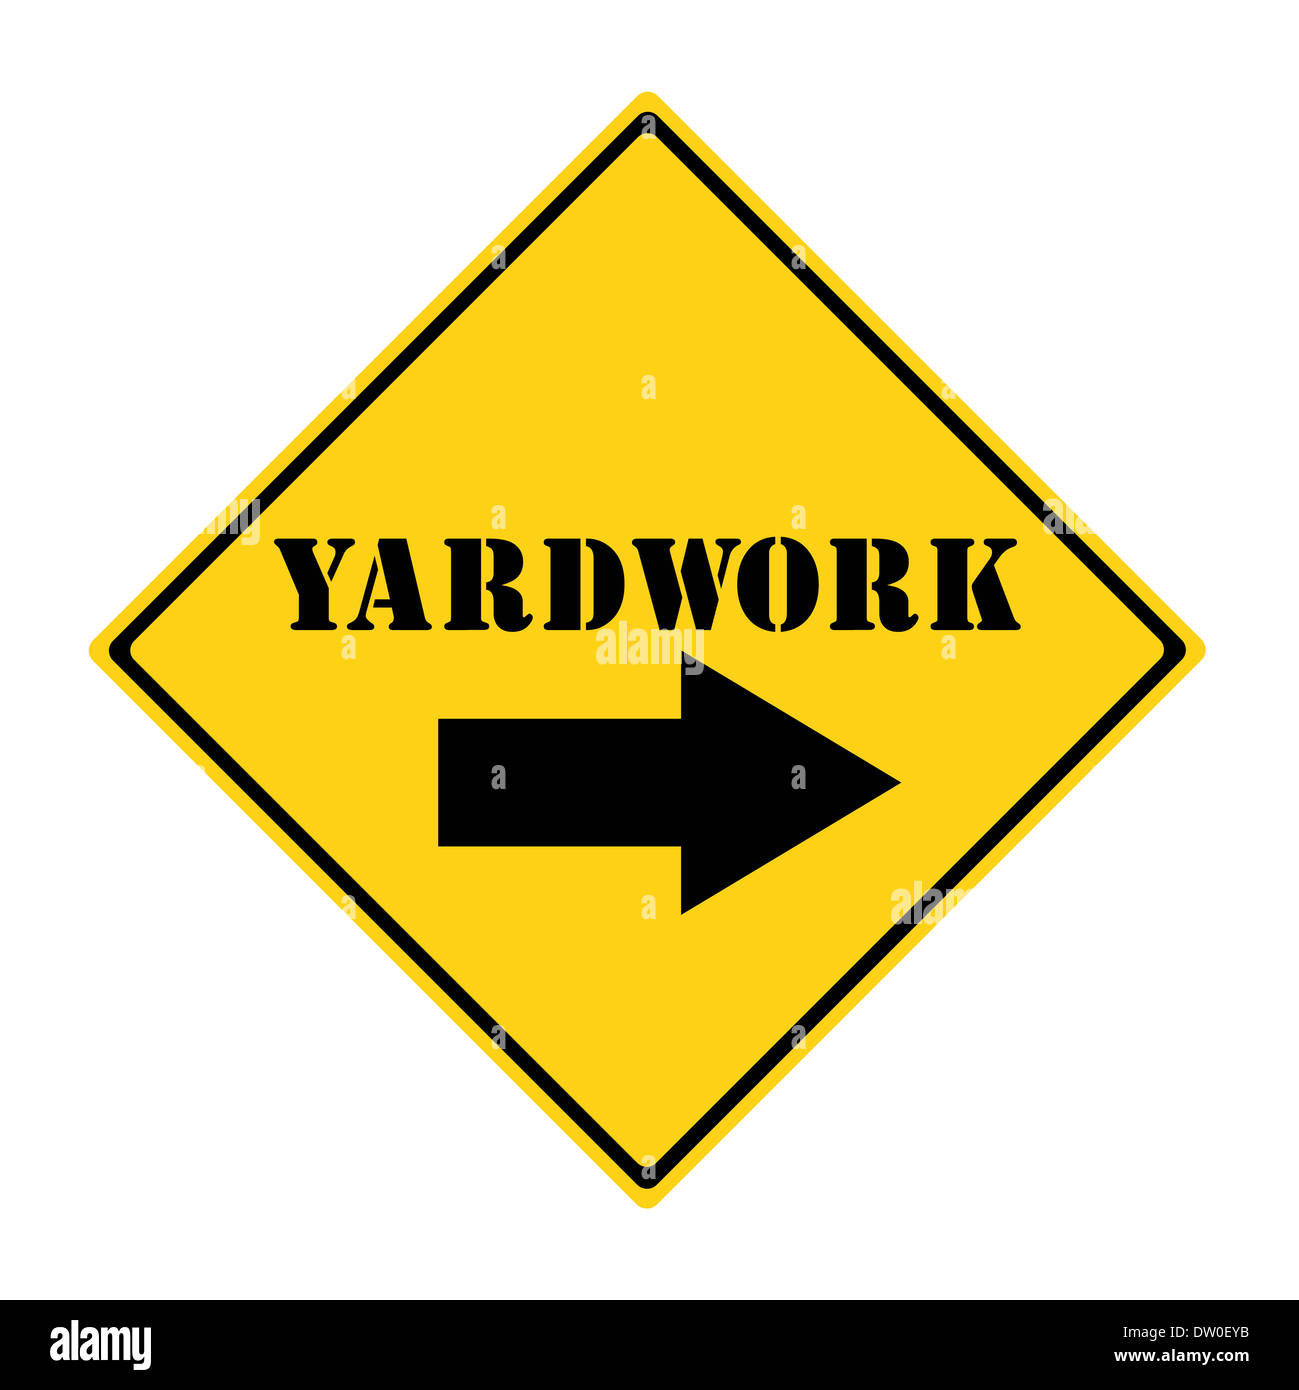 A yellow and black diamond shaped road sign with the word YARDWORK and an arrow pointing the way making a great concept. Stock Photo